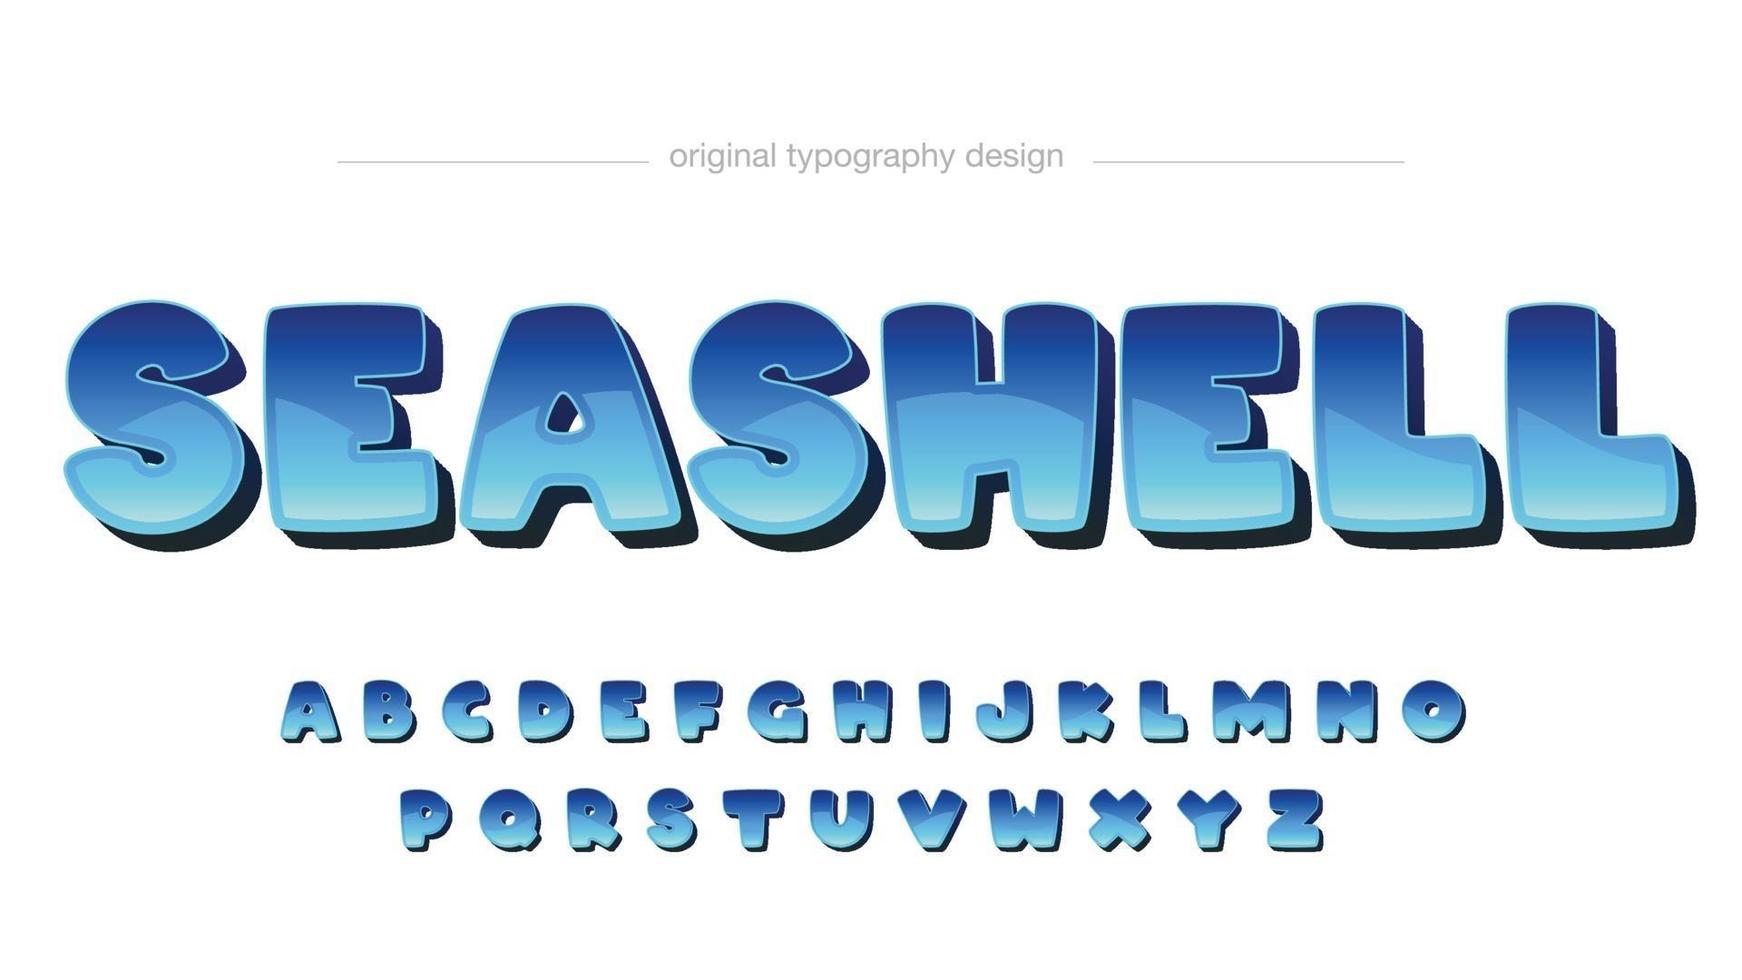 Blue glosssy cartoon rounded typography vector